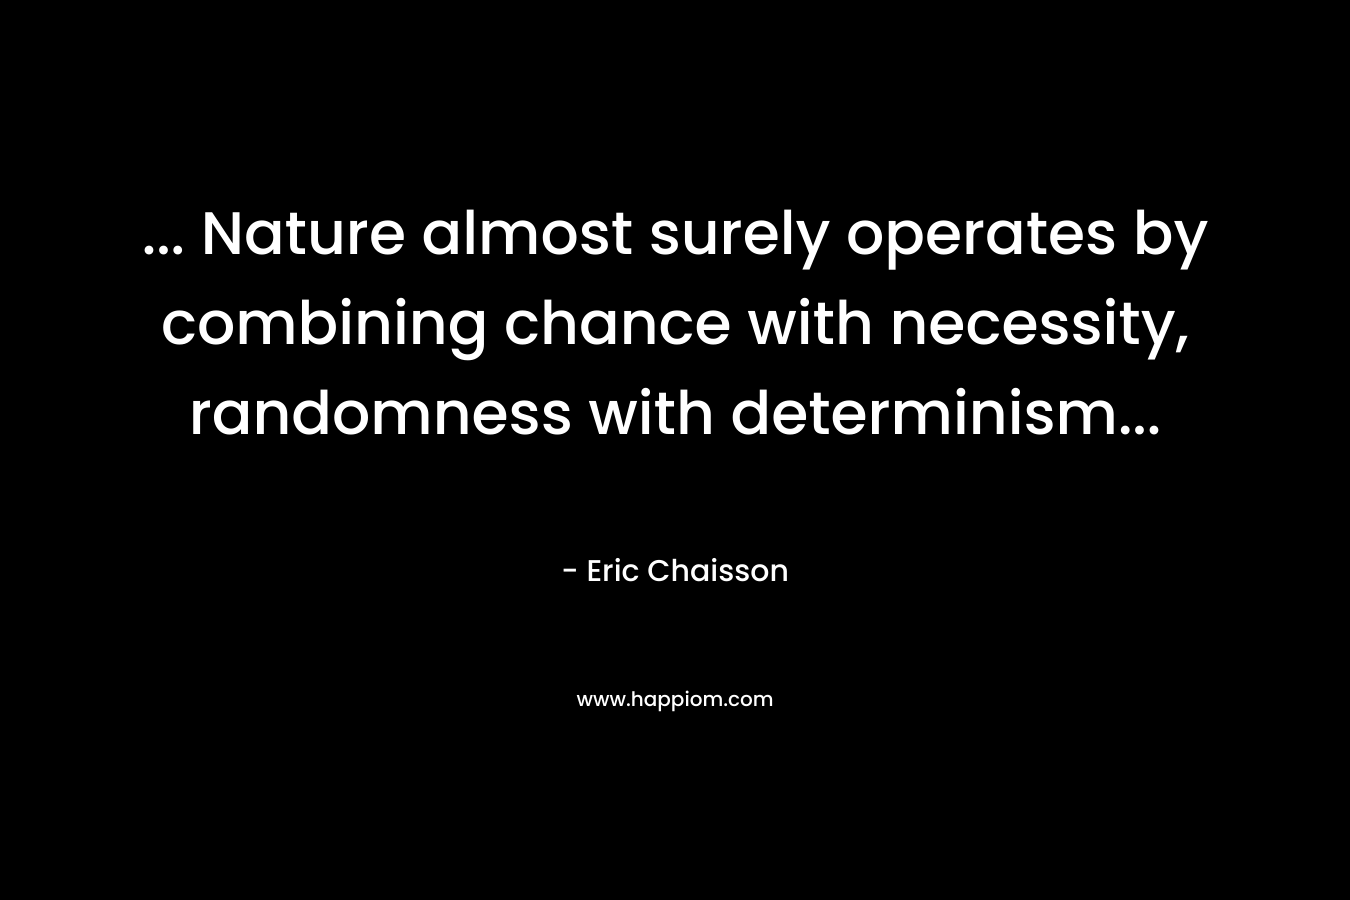 ... Nature almost surely operates by combining chance with necessity, randomness with determinism...